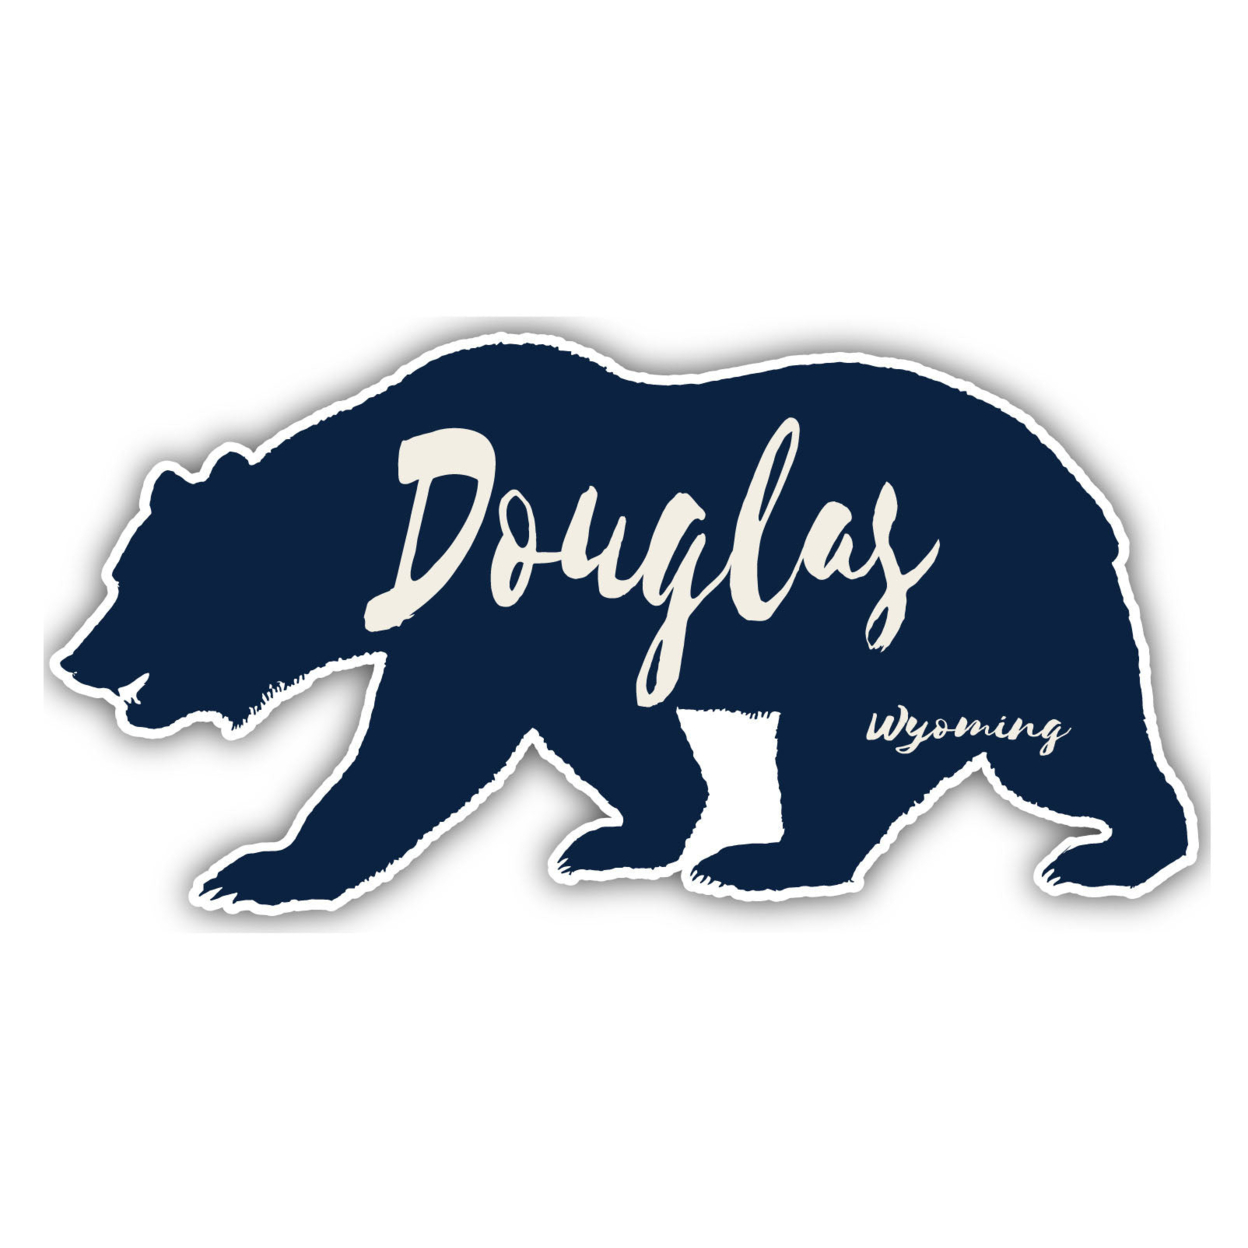 Douglas Wyoming Souvenir Decorative Stickers (Choose Theme And Size) - 4-Pack, 8-Inch, Bear